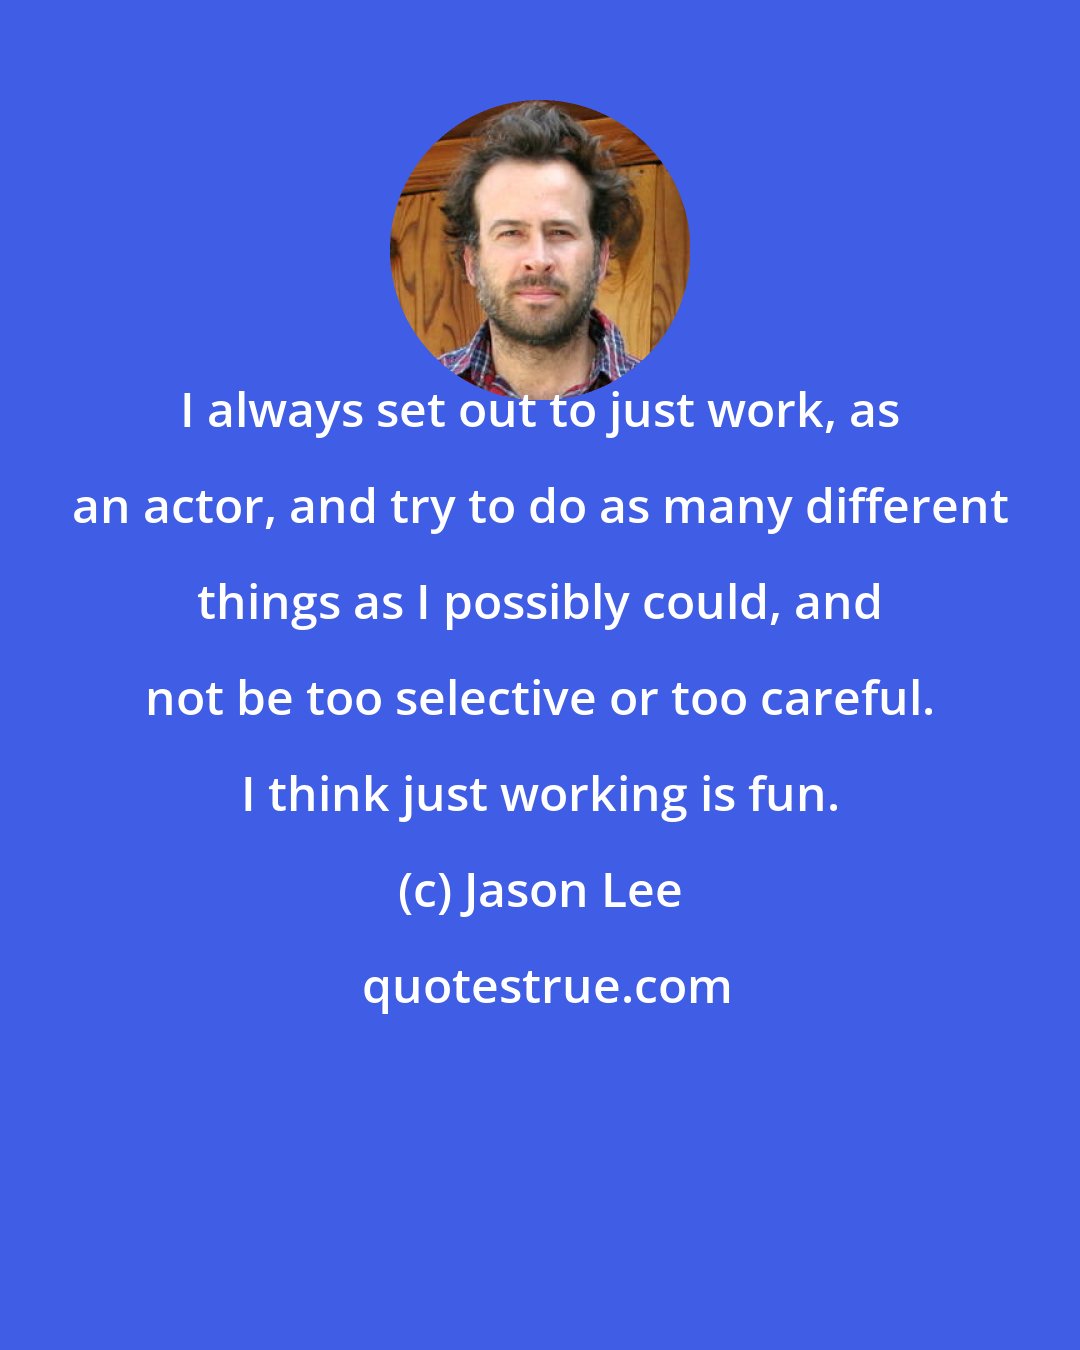 Jason Lee: I always set out to just work, as an actor, and try to do as many different things as I possibly could, and not be too selective or too careful. I think just working is fun.